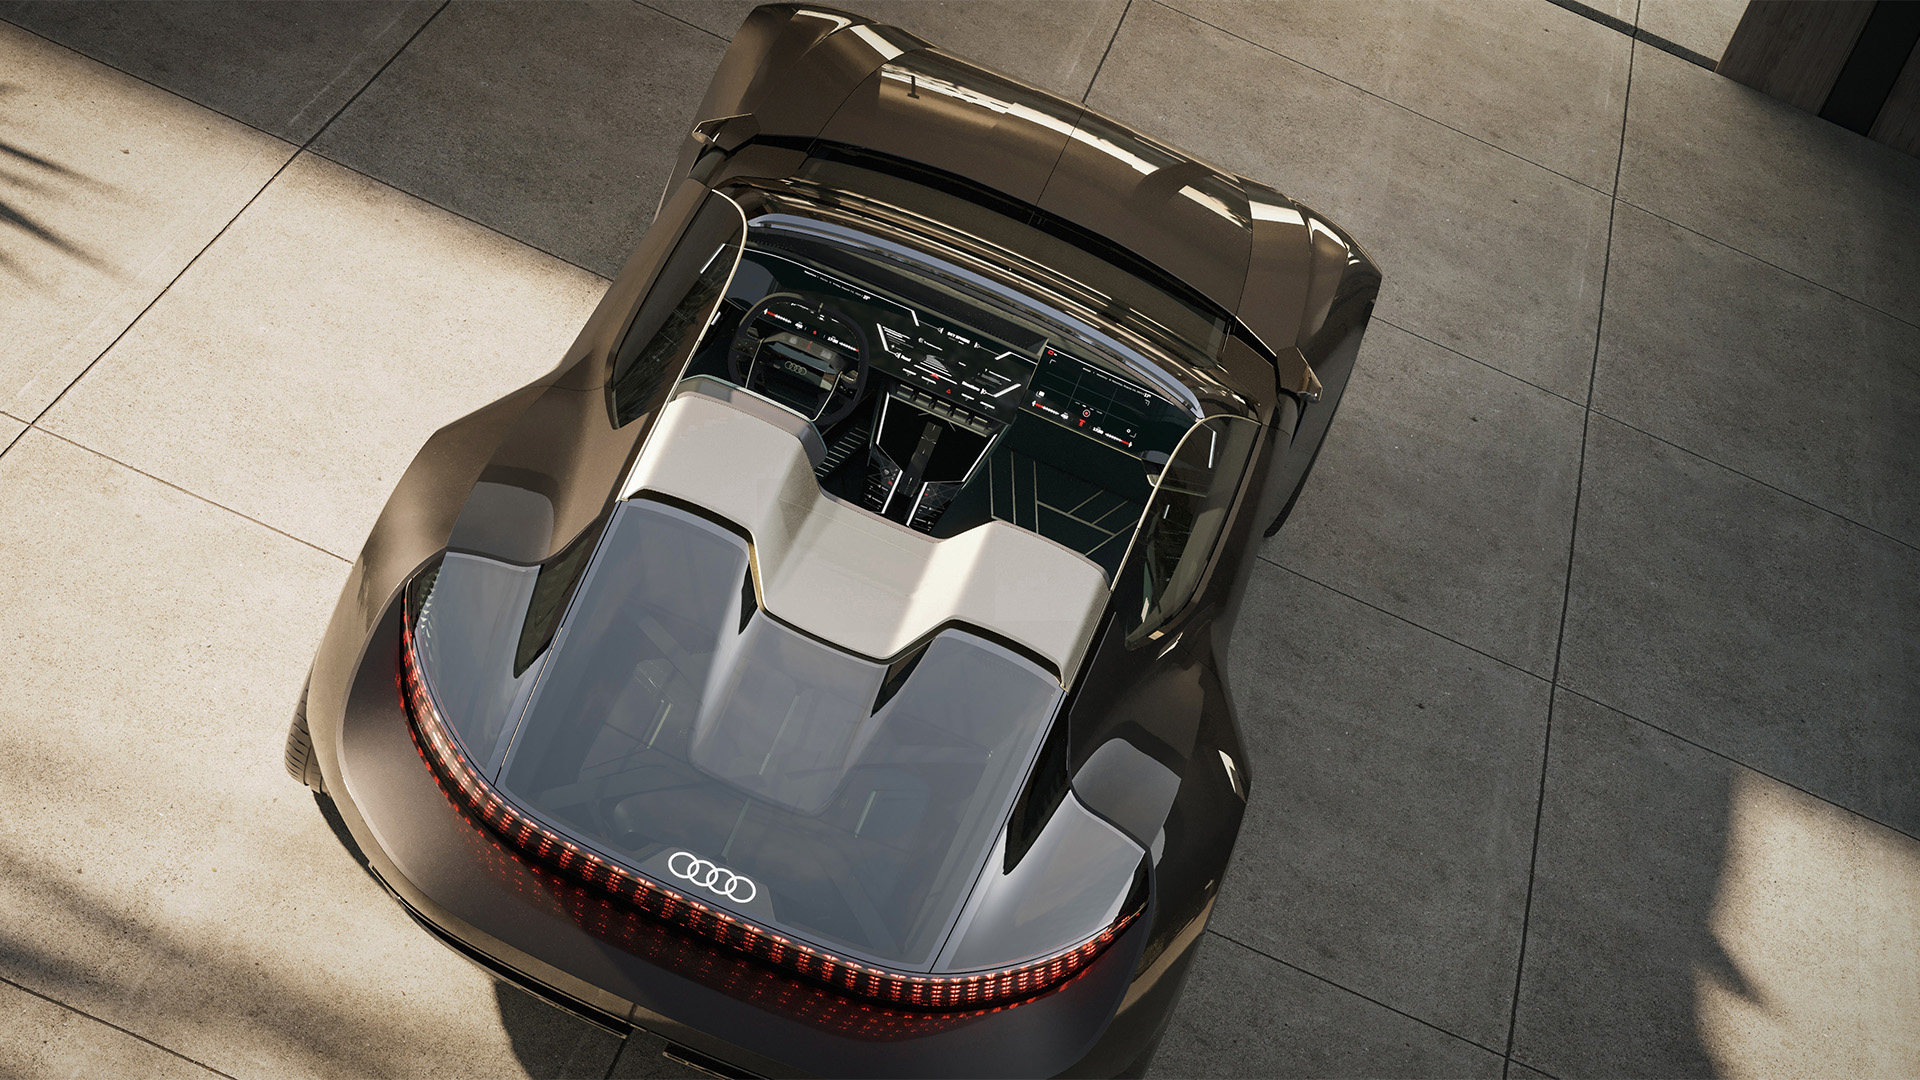 Audi skysphere roadster viewed diagonally from above